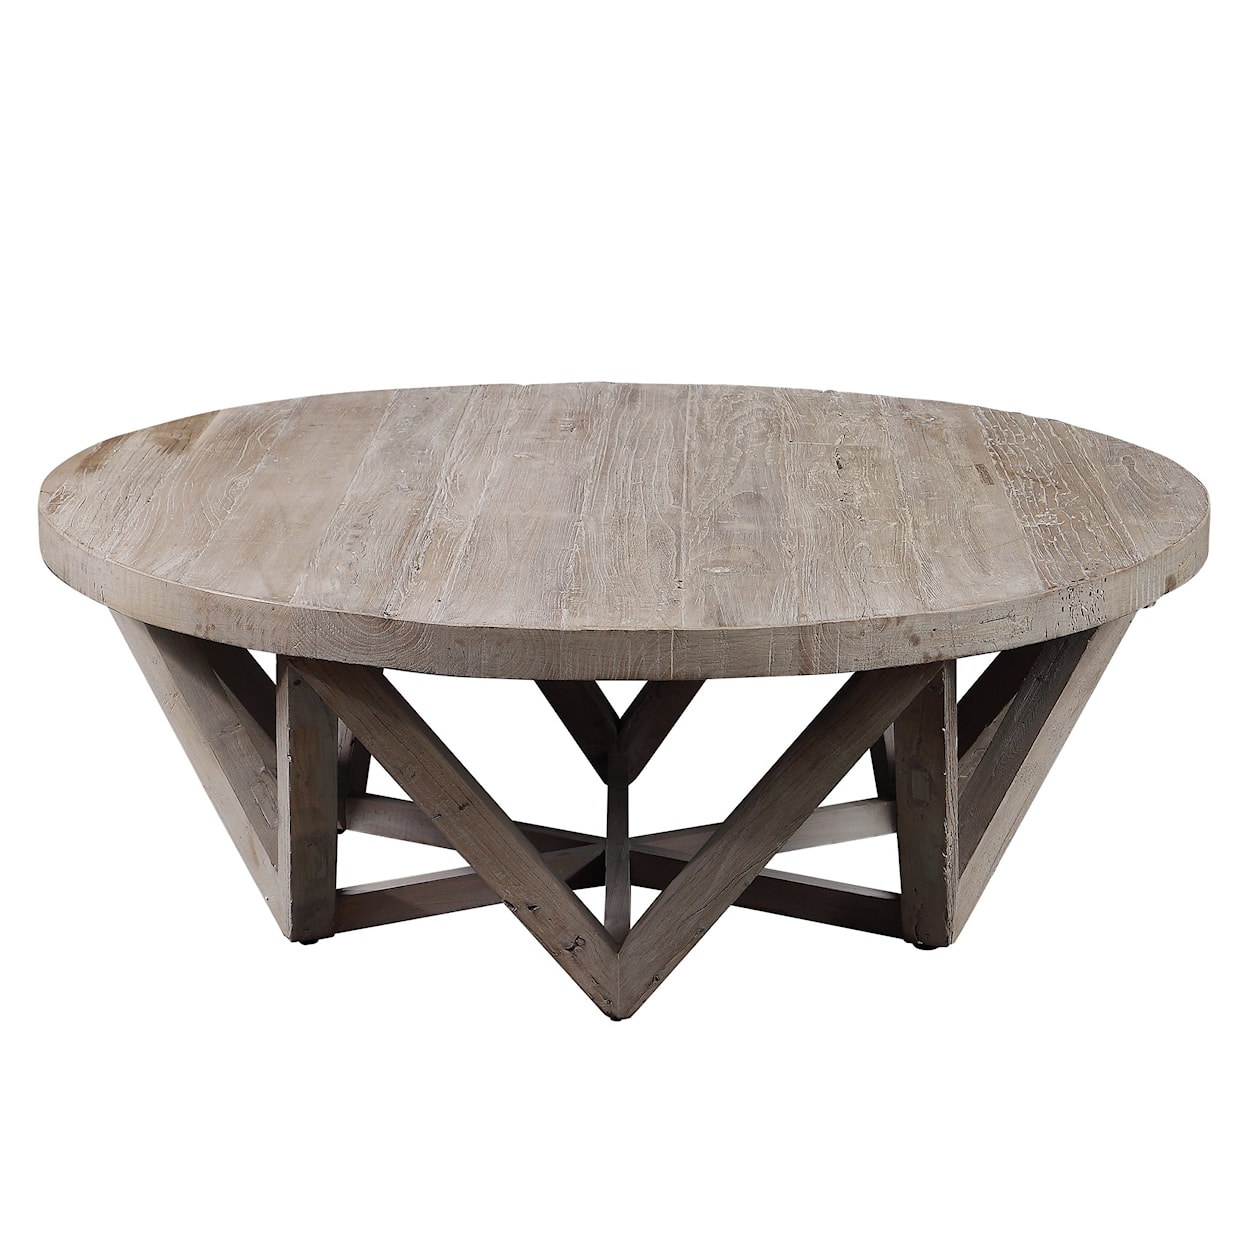 Uttermost Accent Furniture - Occasional Tables Kendry Reclaimed Wood Coffee Table